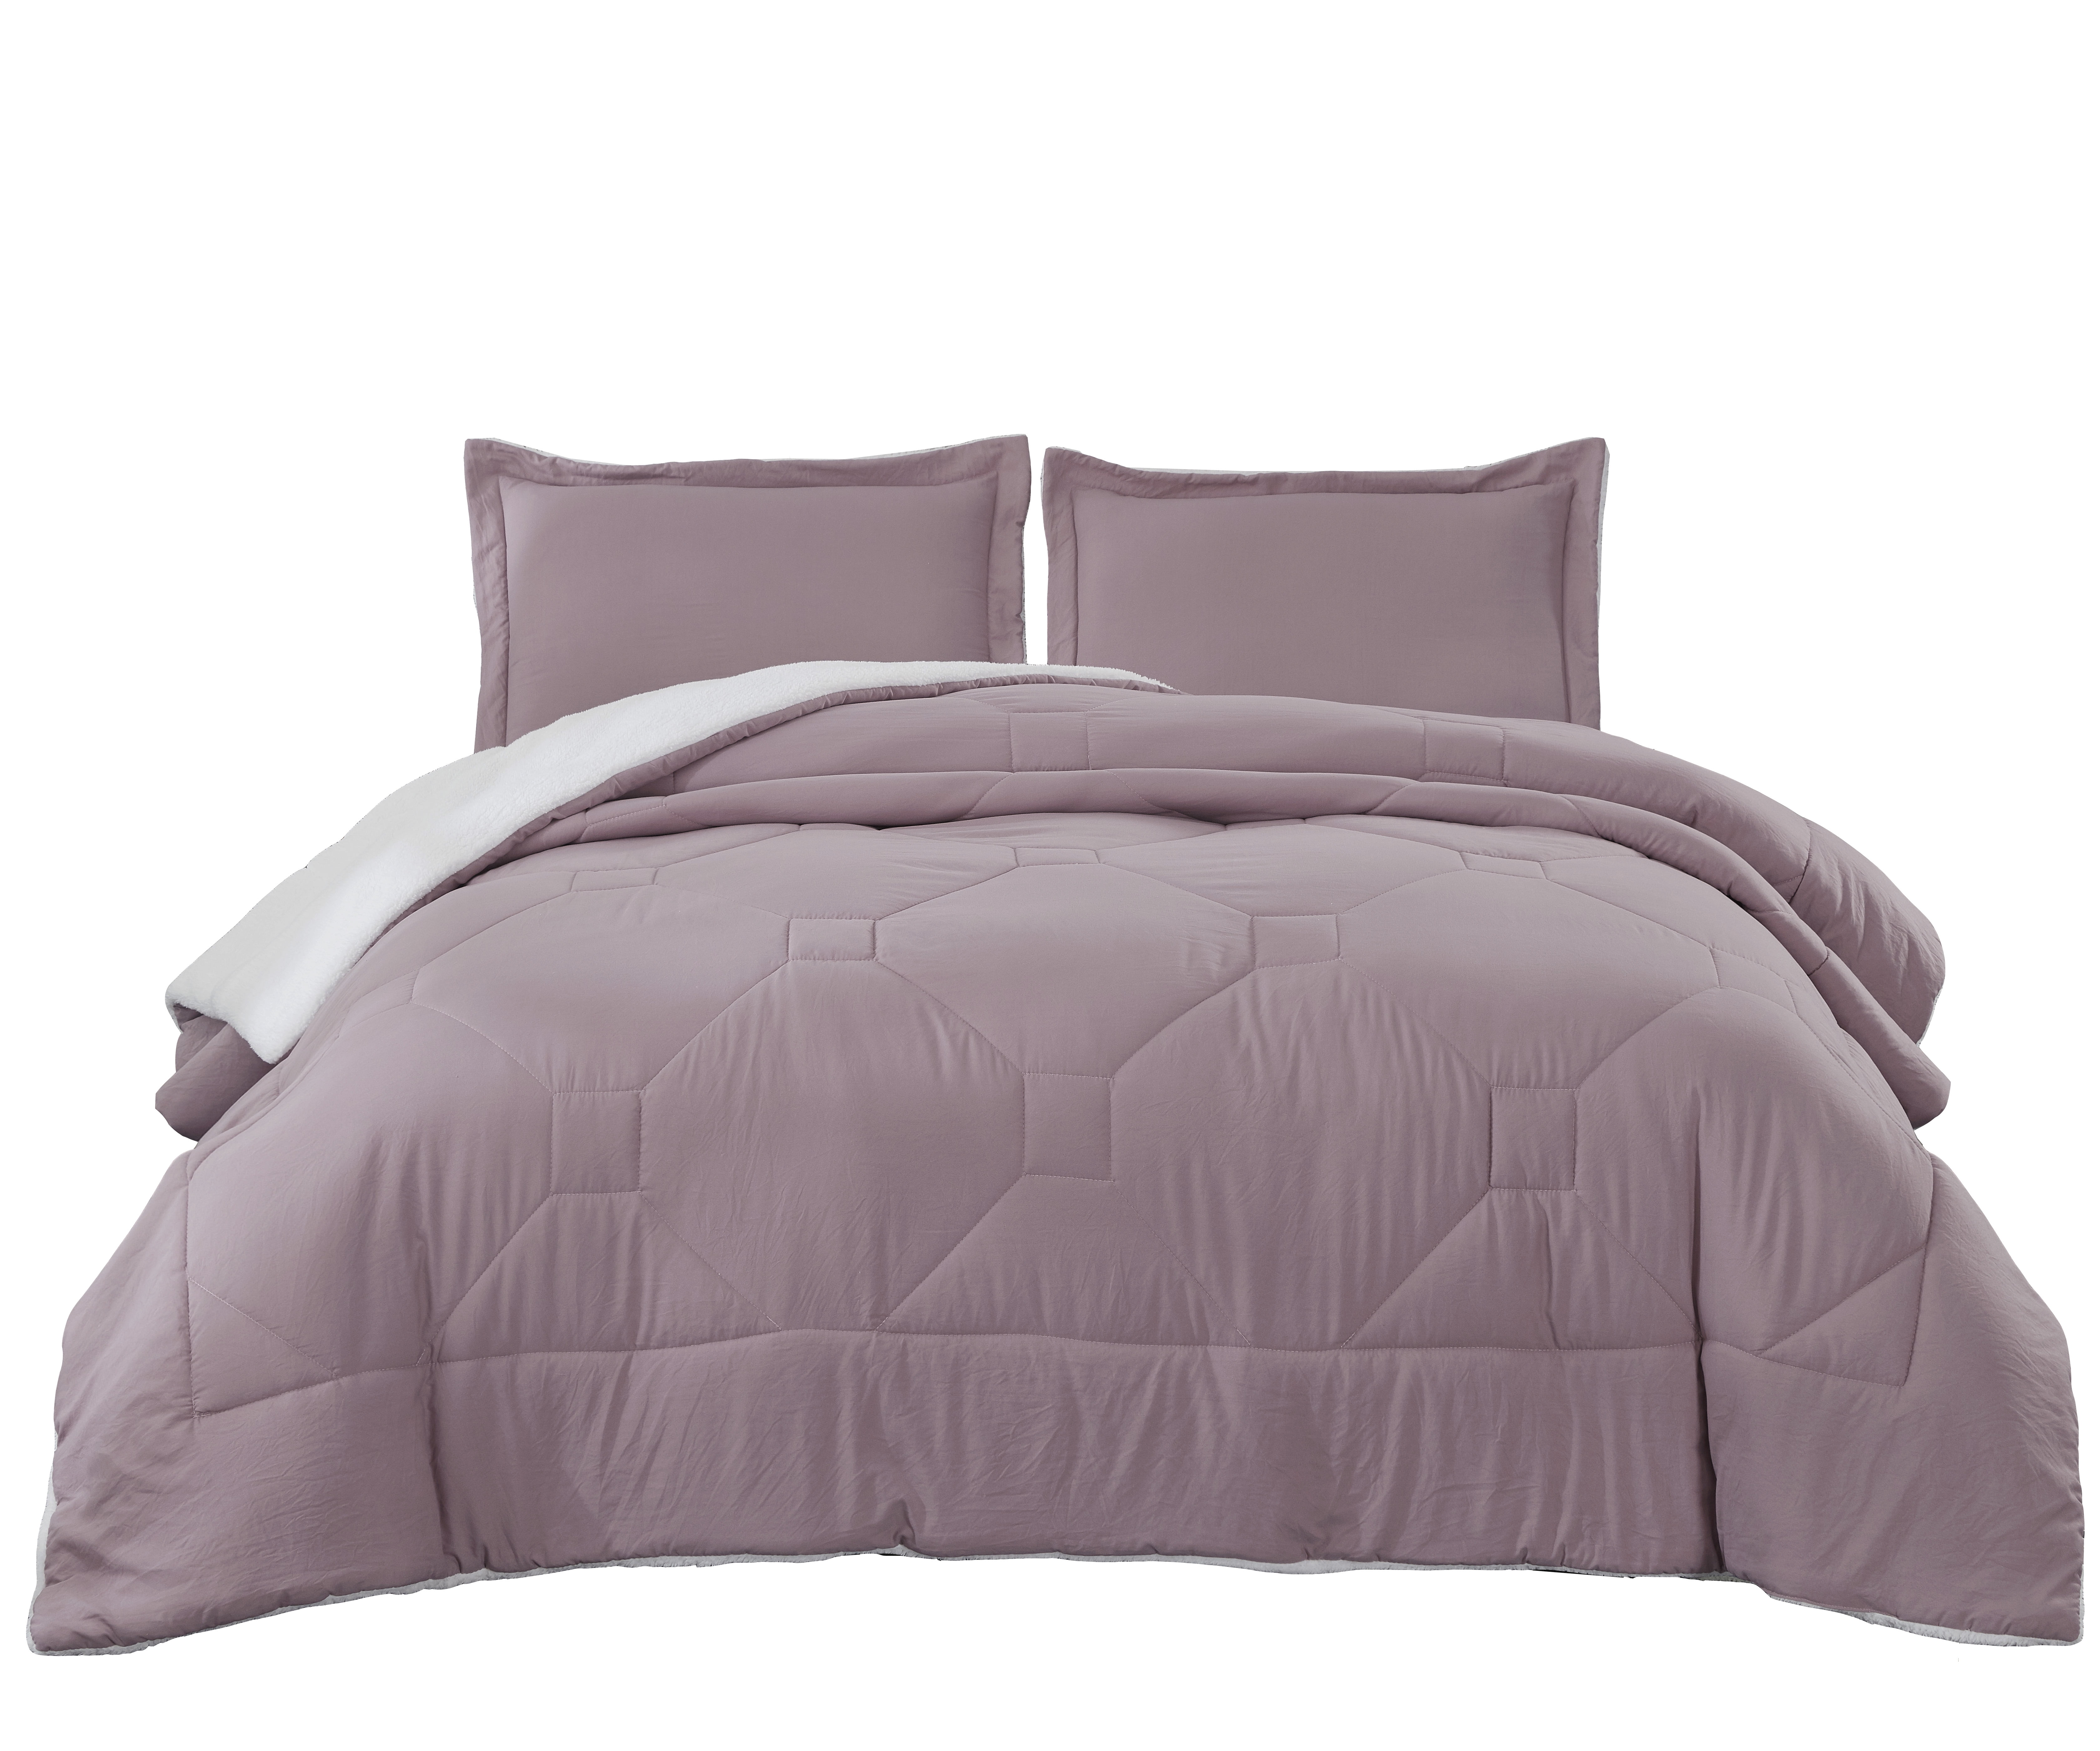 Purple Quilted Microfiber Plush Flannel Sherpa Comforter 3pc Set Full/Queen 